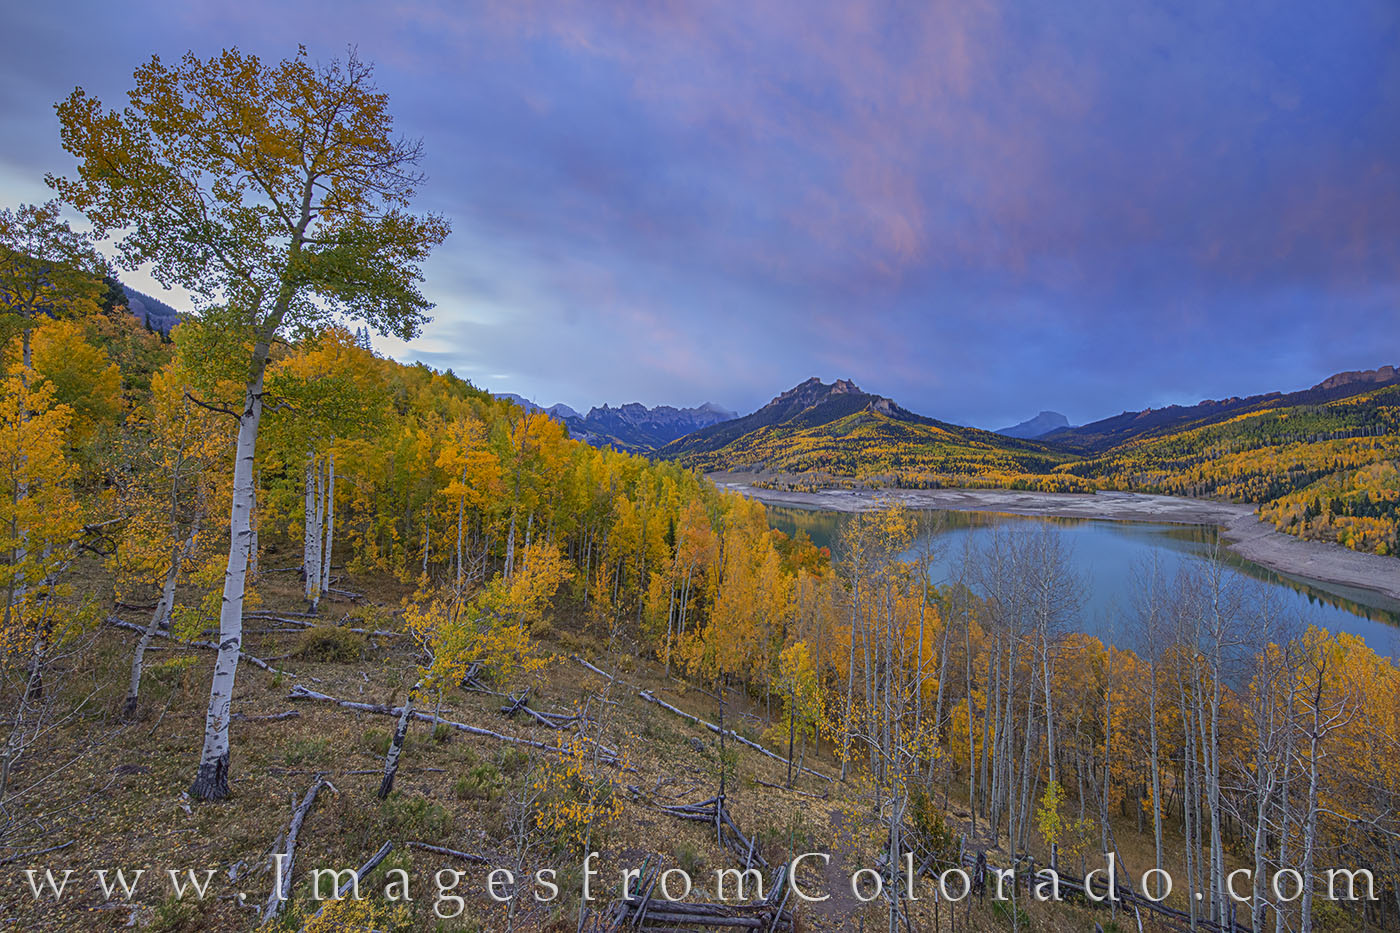 Silver Jack fall colors shine even well before sunrise as clouds race acros the sky on a cold October morning. Some aspen were...